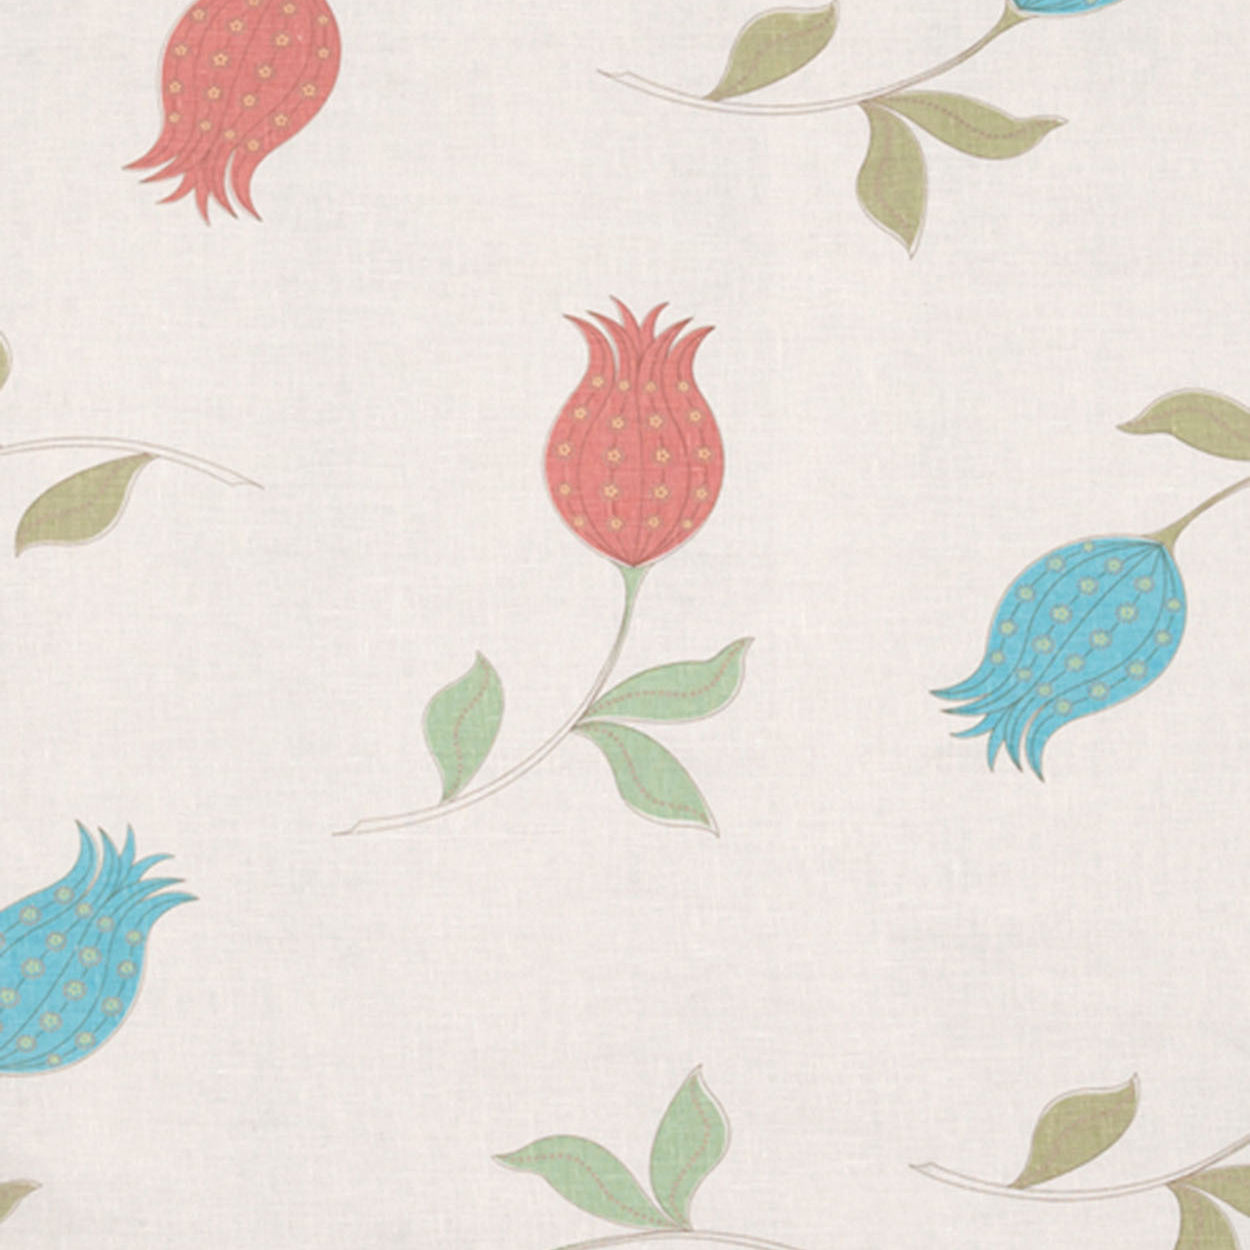 Fabric with a large-scale tulip print in shades of red, blue and green on a cream field.